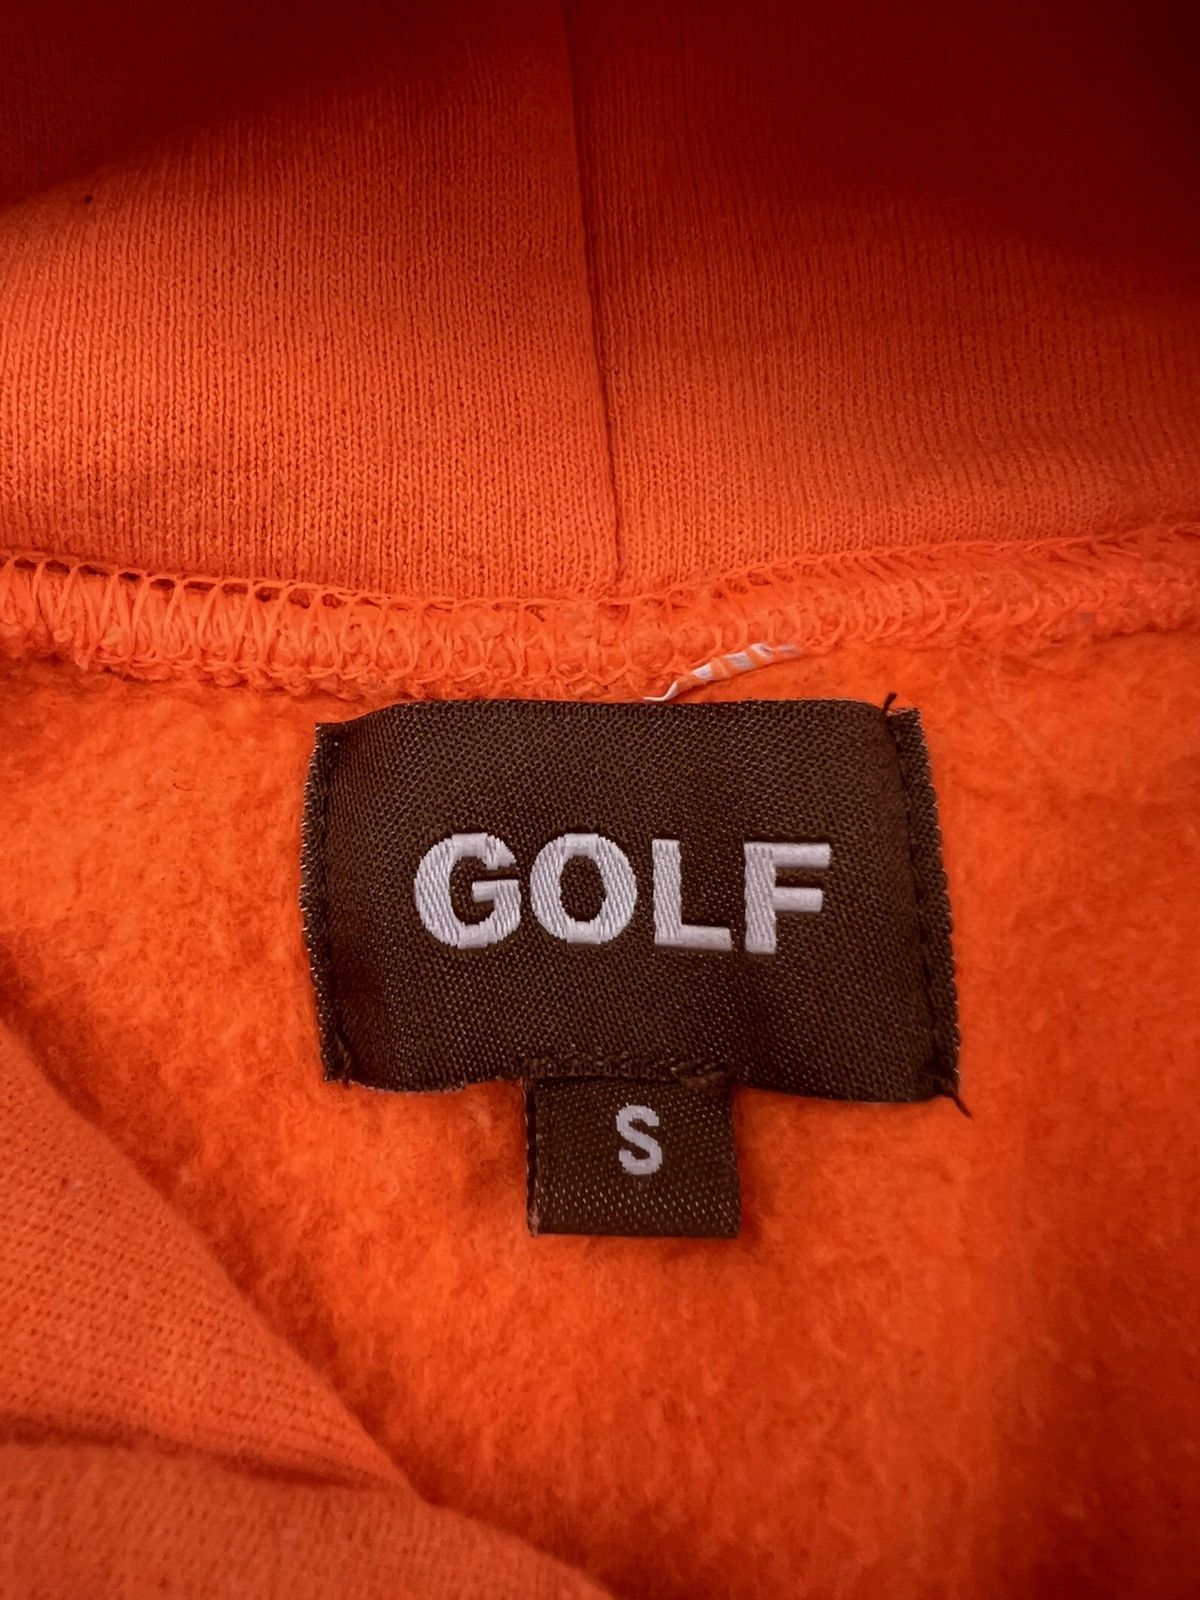 Golf Wang Golf Wang Save The Bees Neon Orange Hoodie Sz. Small Size US S / EU 44-46 / 1 - 6 Preview